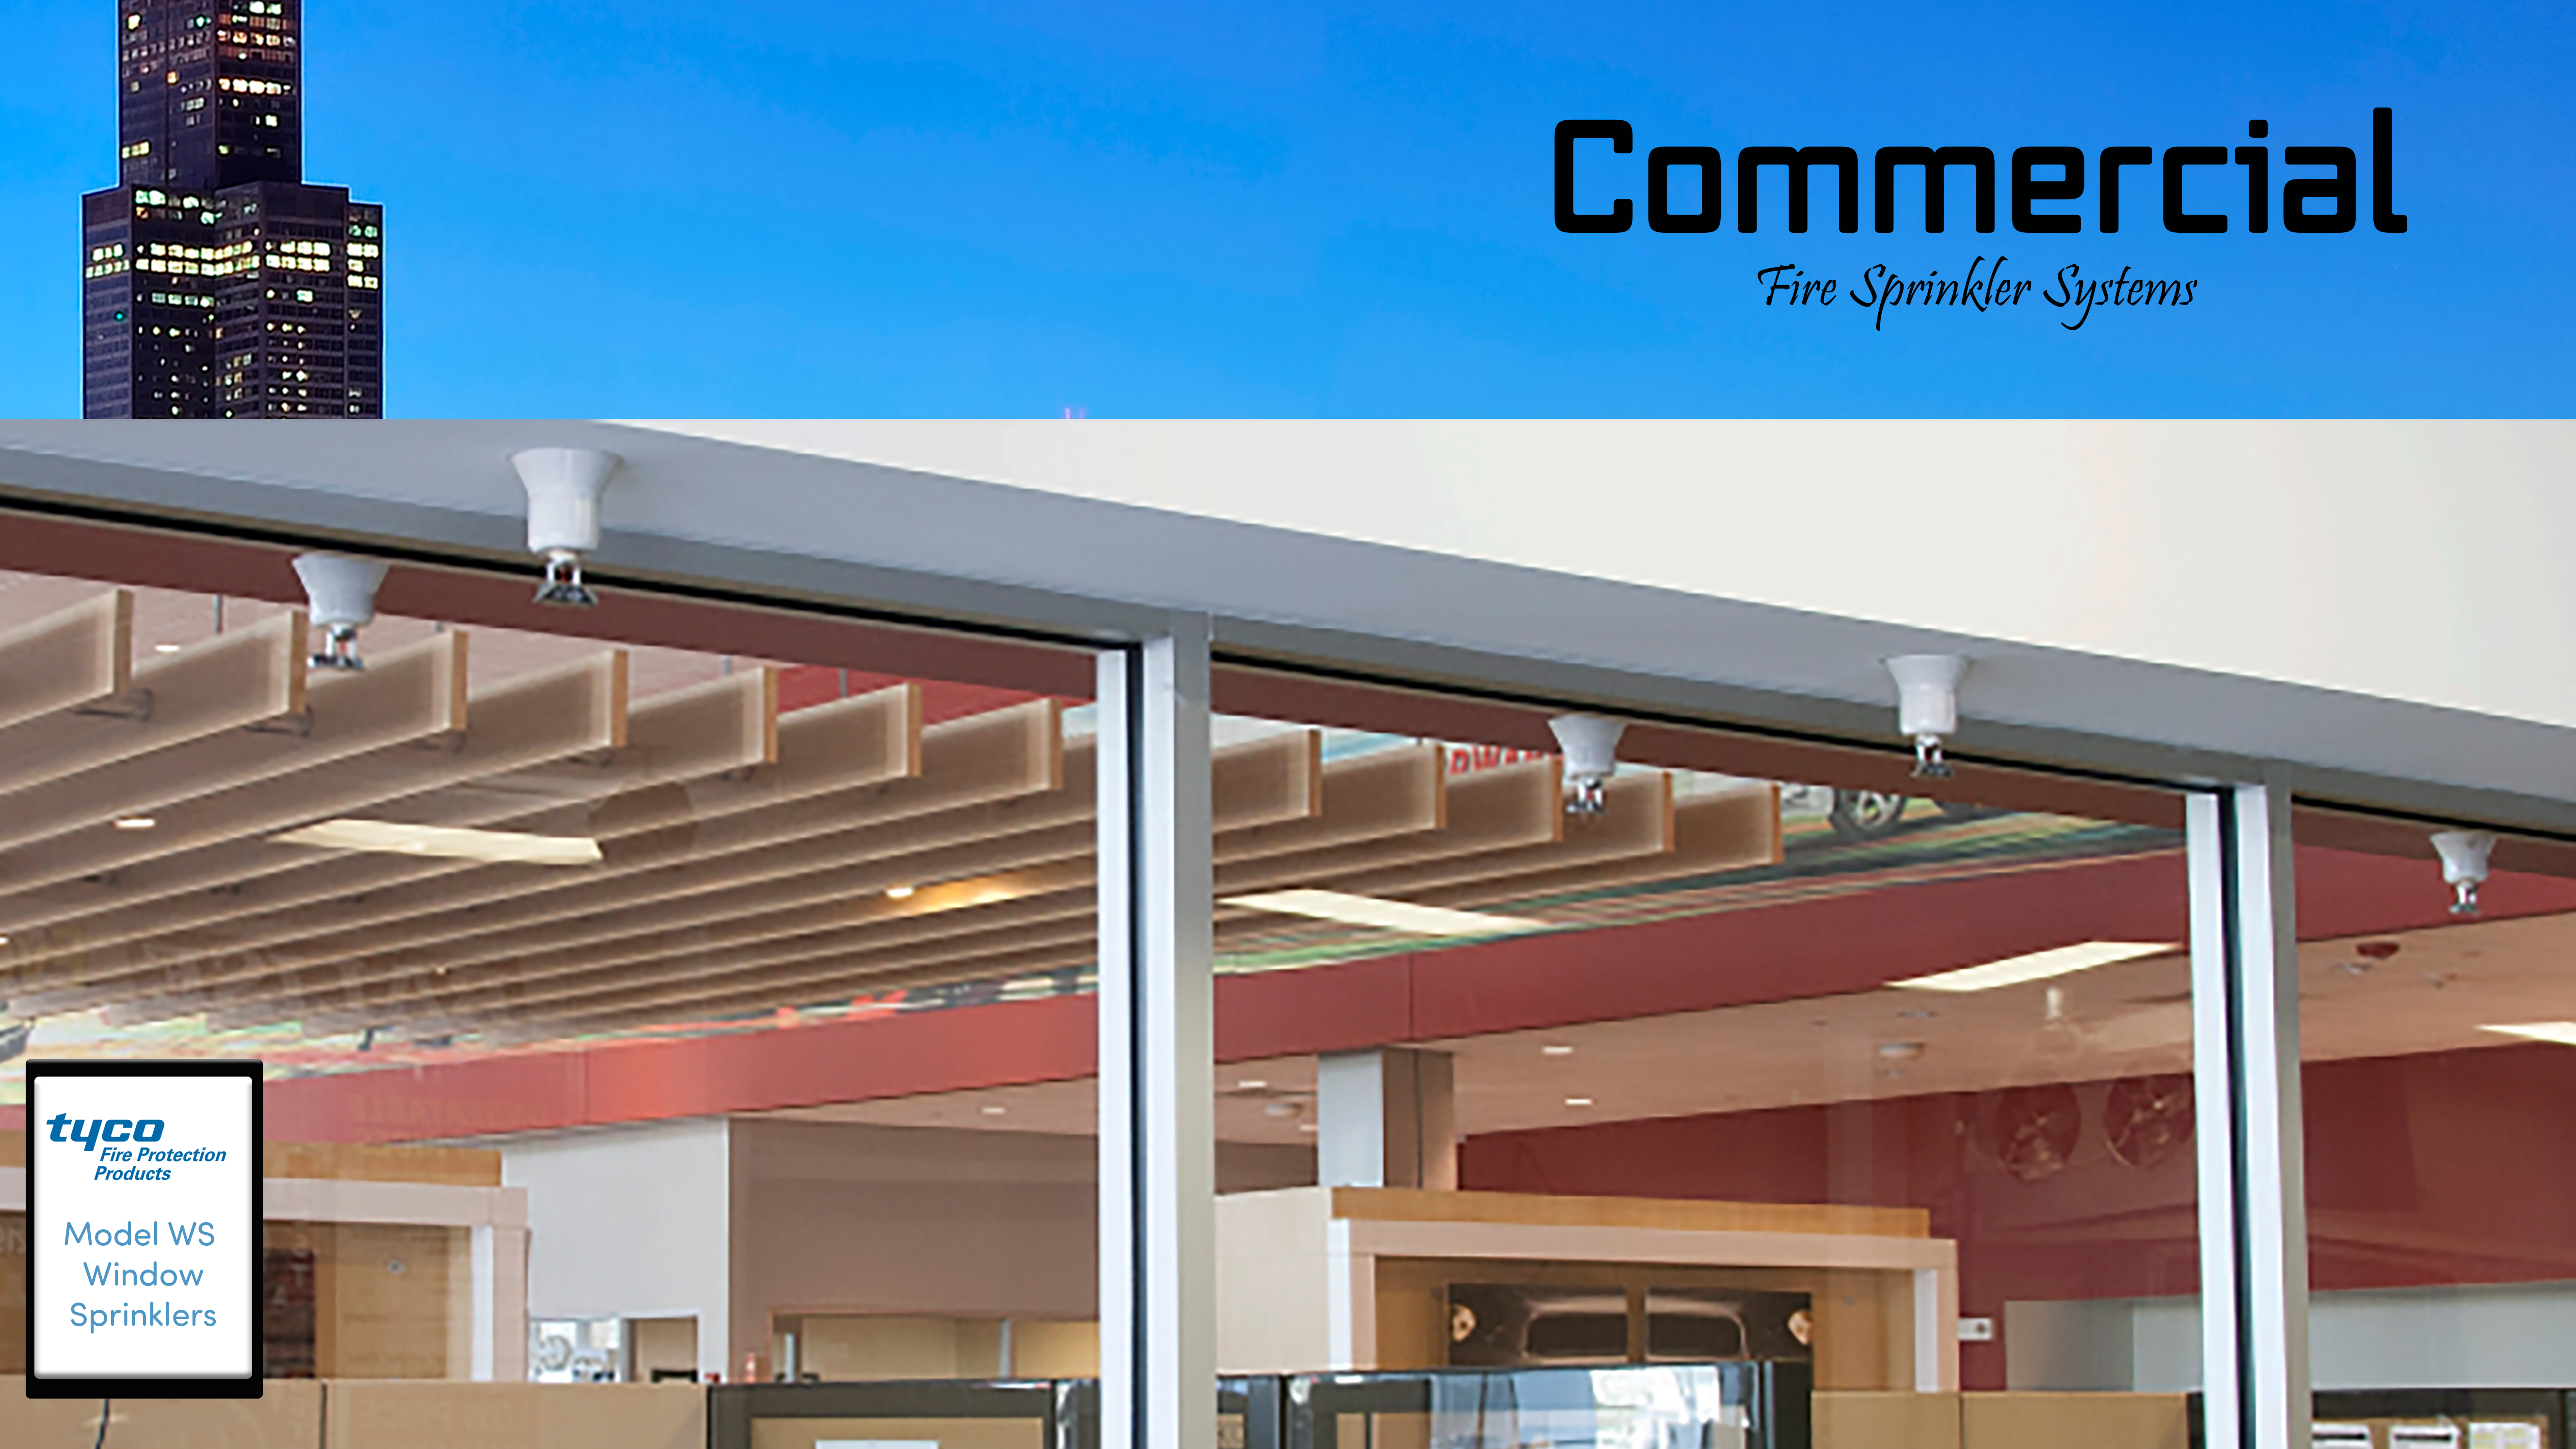 Commercial Fire Sprinkler Services in Anaheim, California